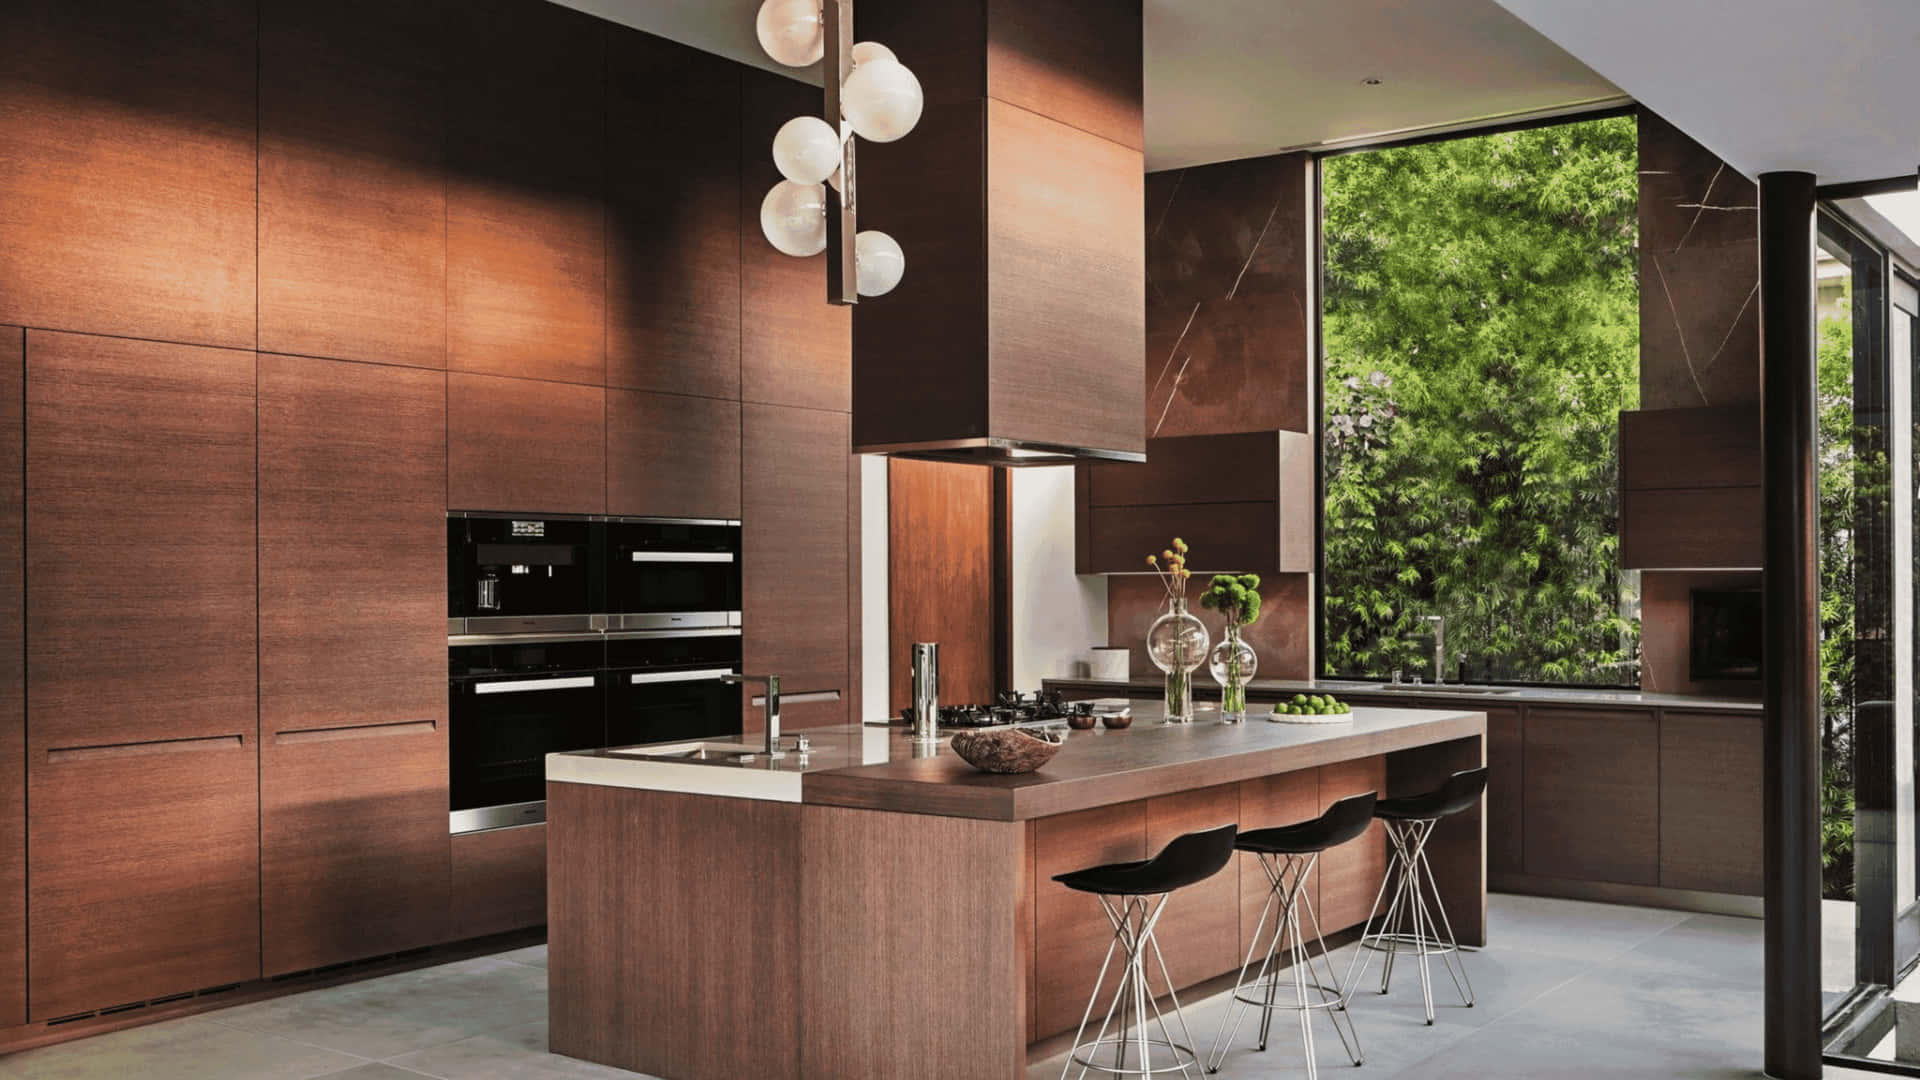 A Modern Kitchen With Wooden Cabinets